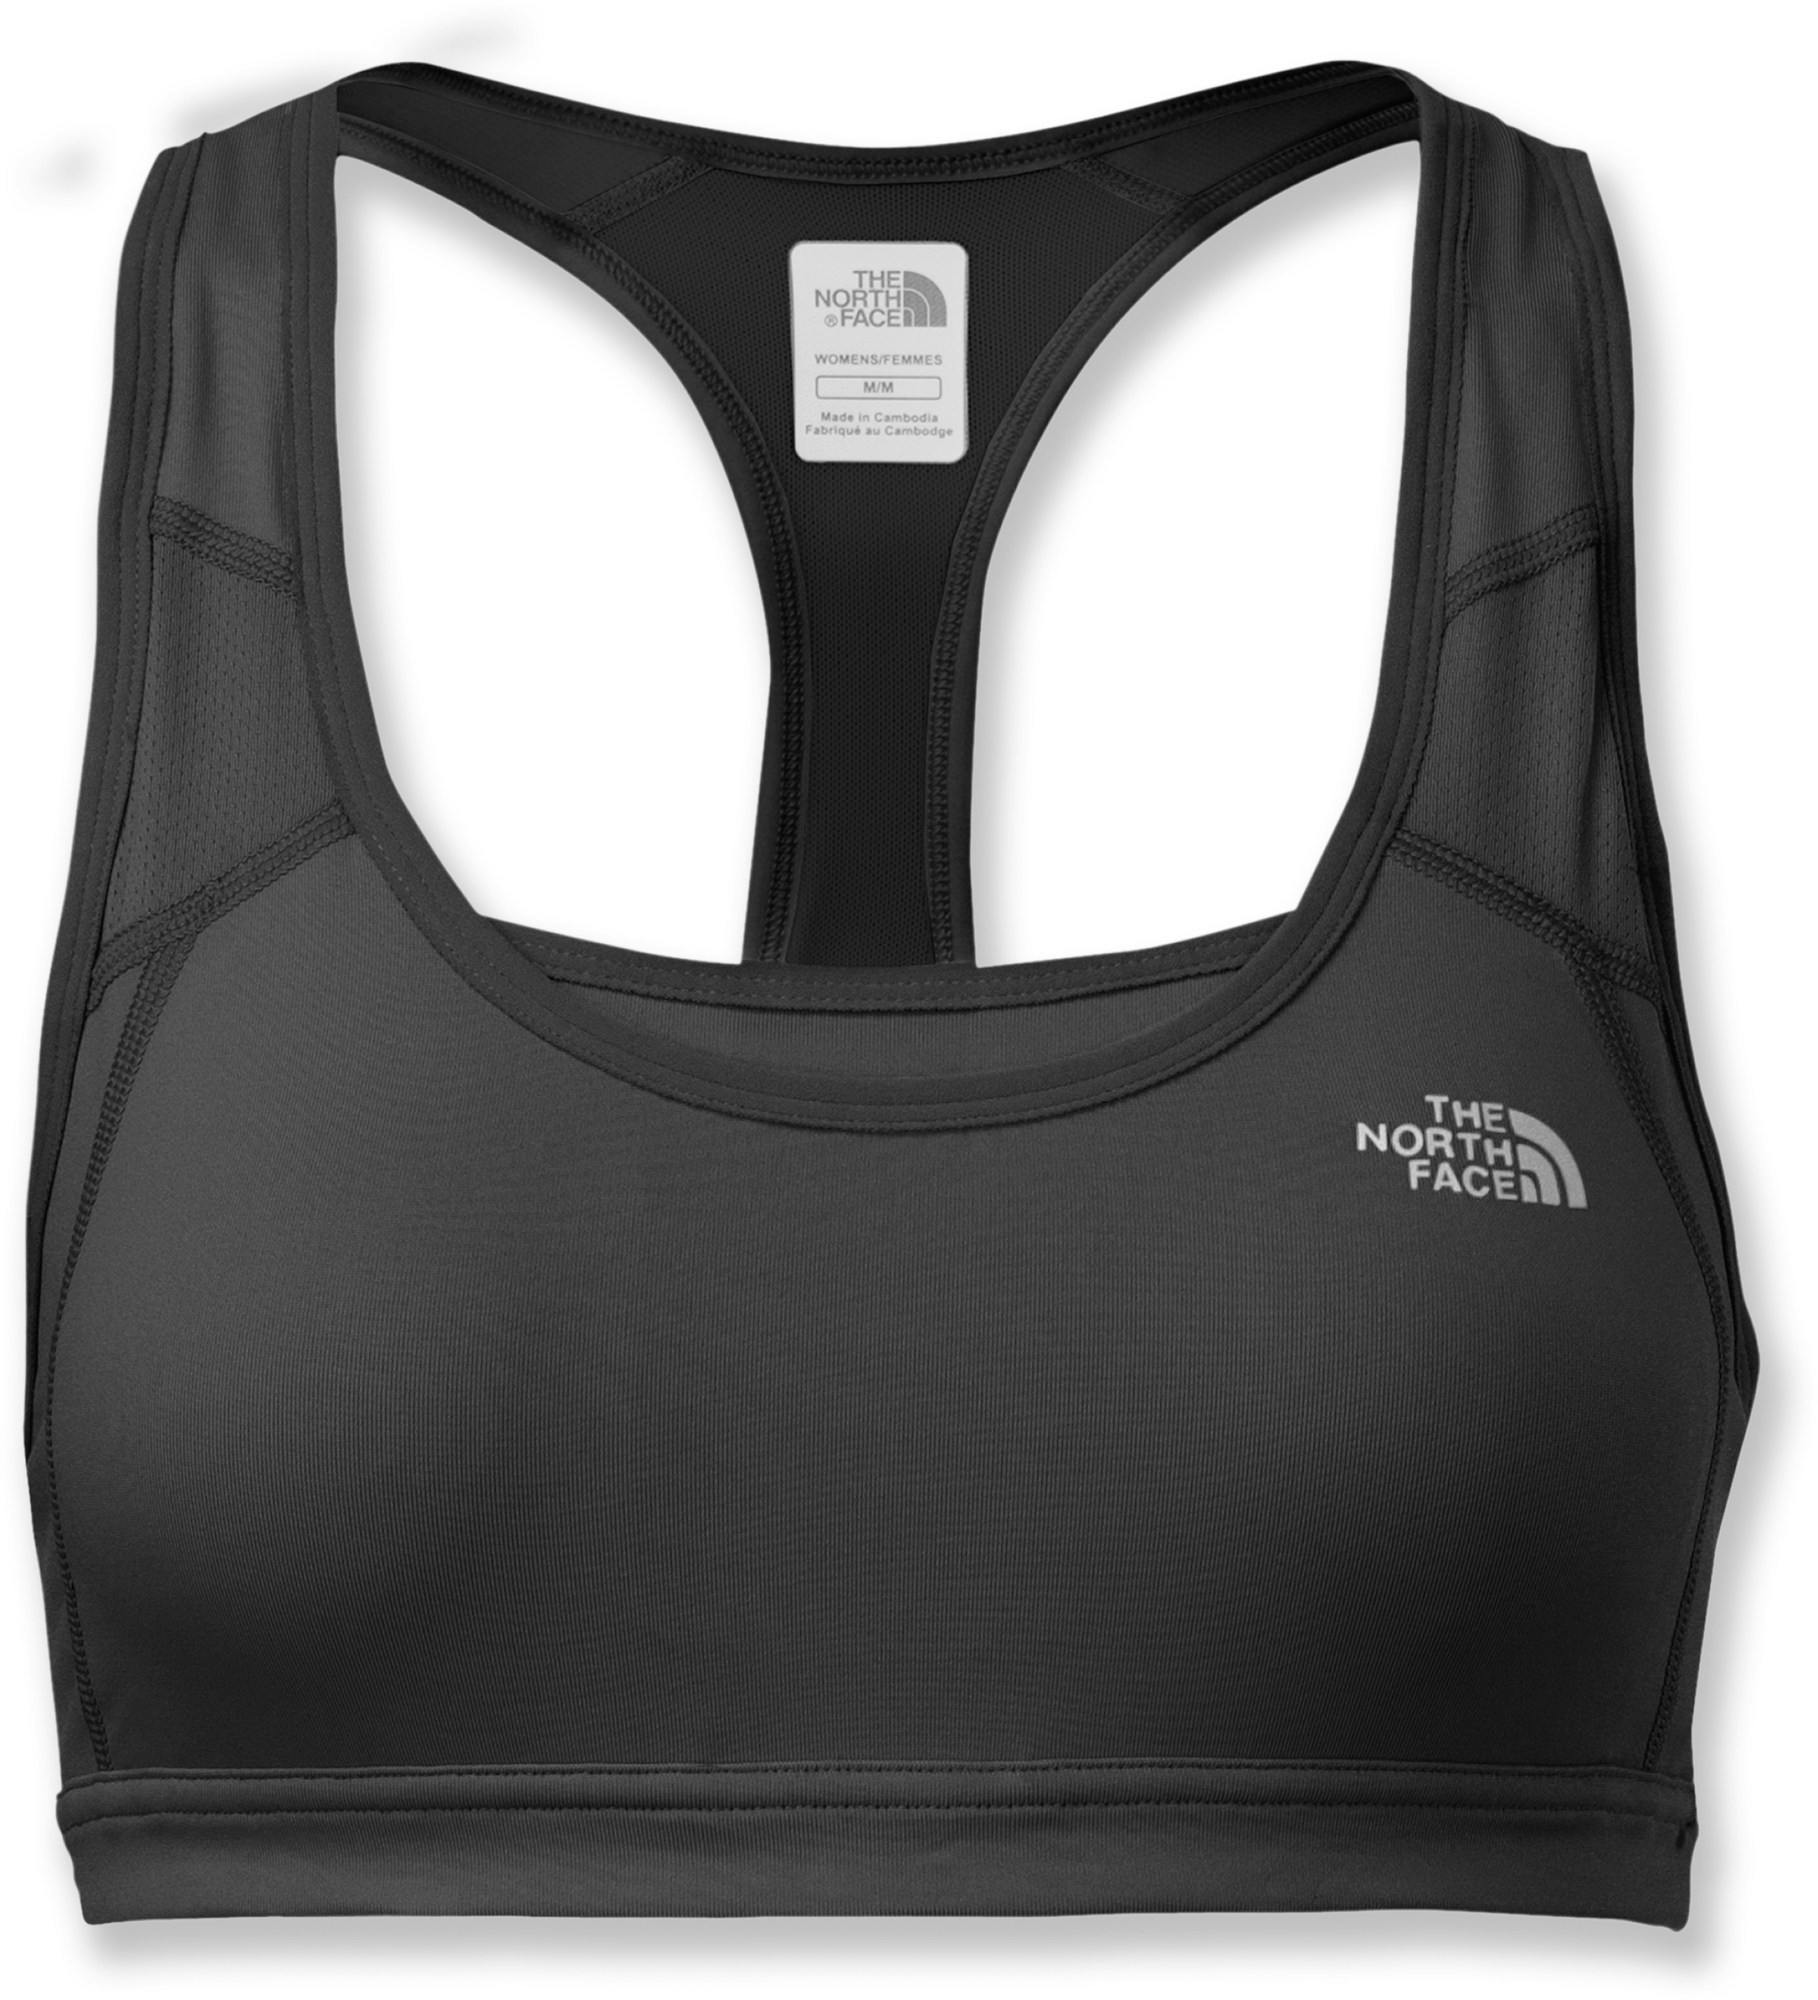 The North Face Stow-N-Go Bra